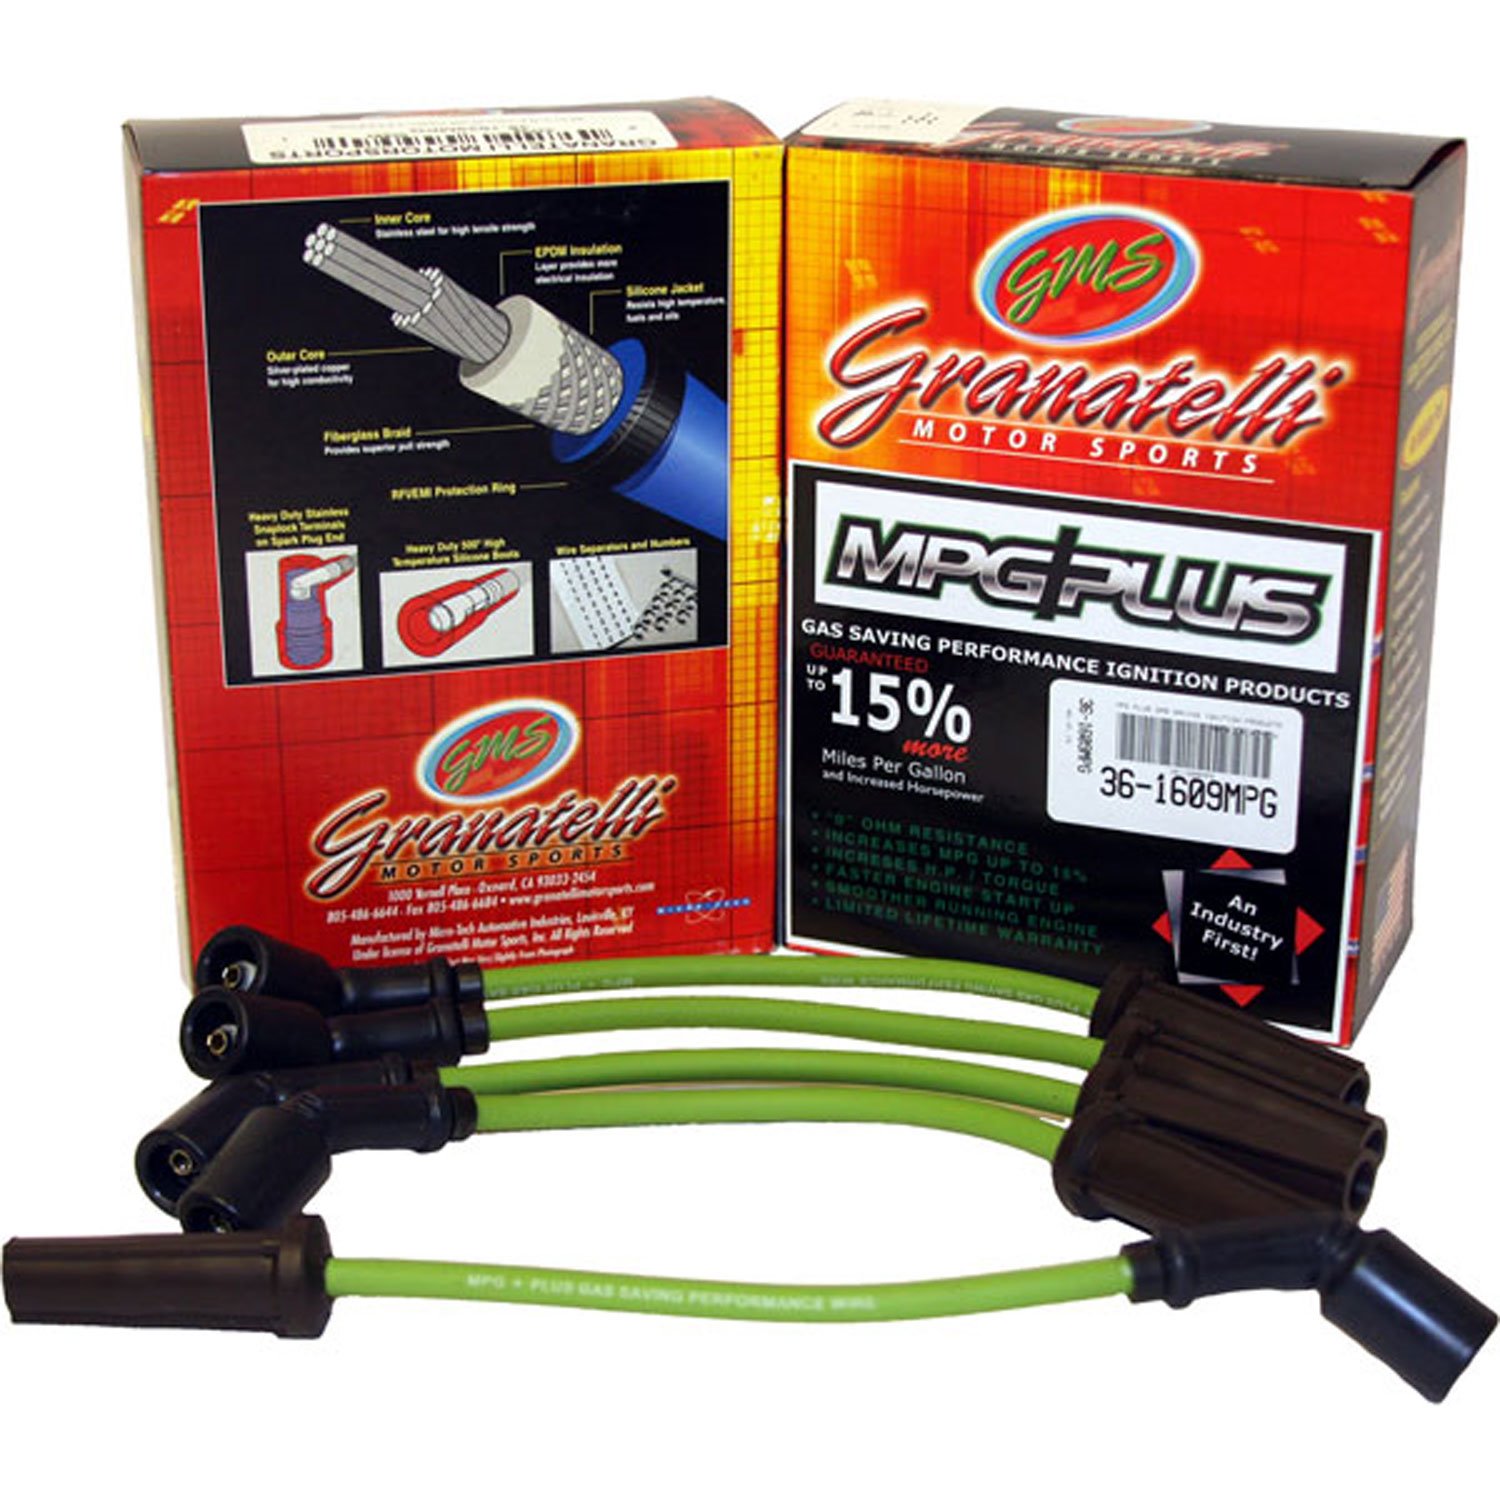 MPG Wires NISSAN PICKUPS INCLUDES D21 720 4CYL 2.4L 96-97